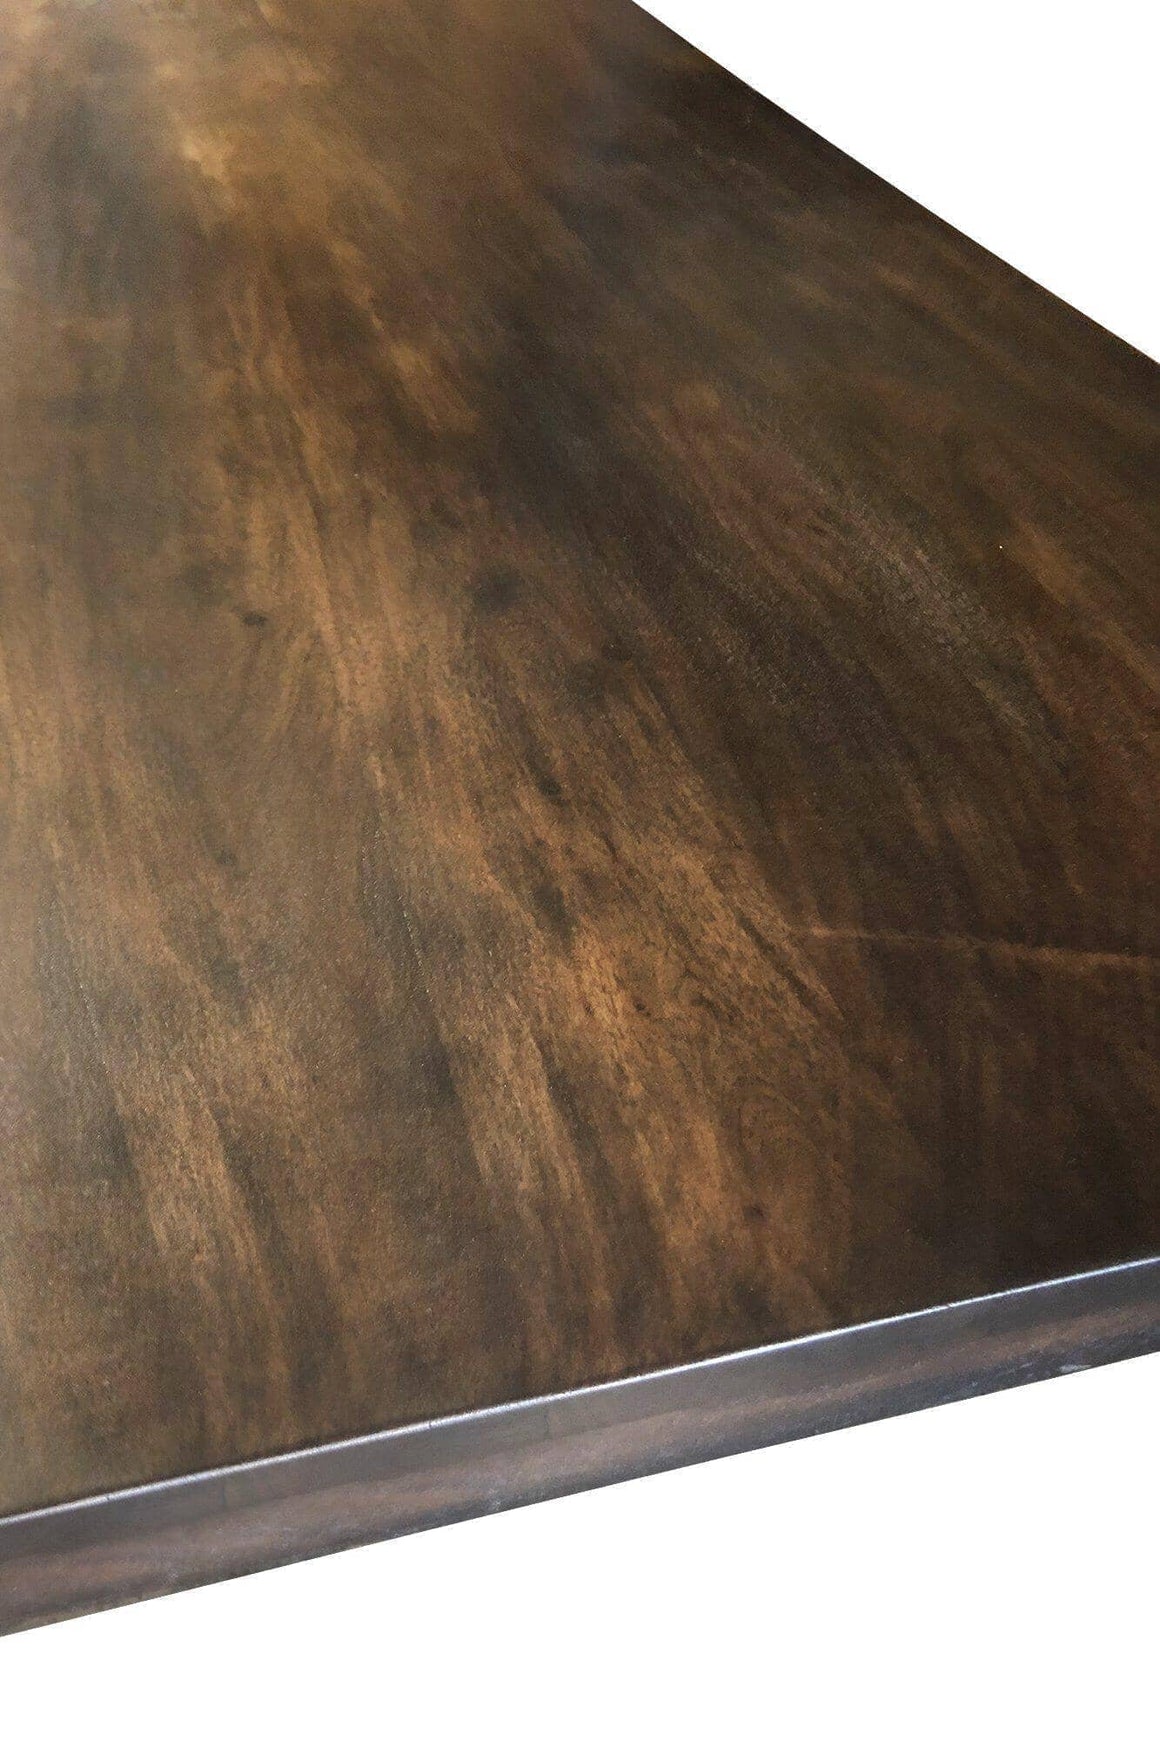 Solid Acacia Wood Dining Table or Desk Top 80x40 2.25" - Ebony Finish - Rustic Deco Incorporated